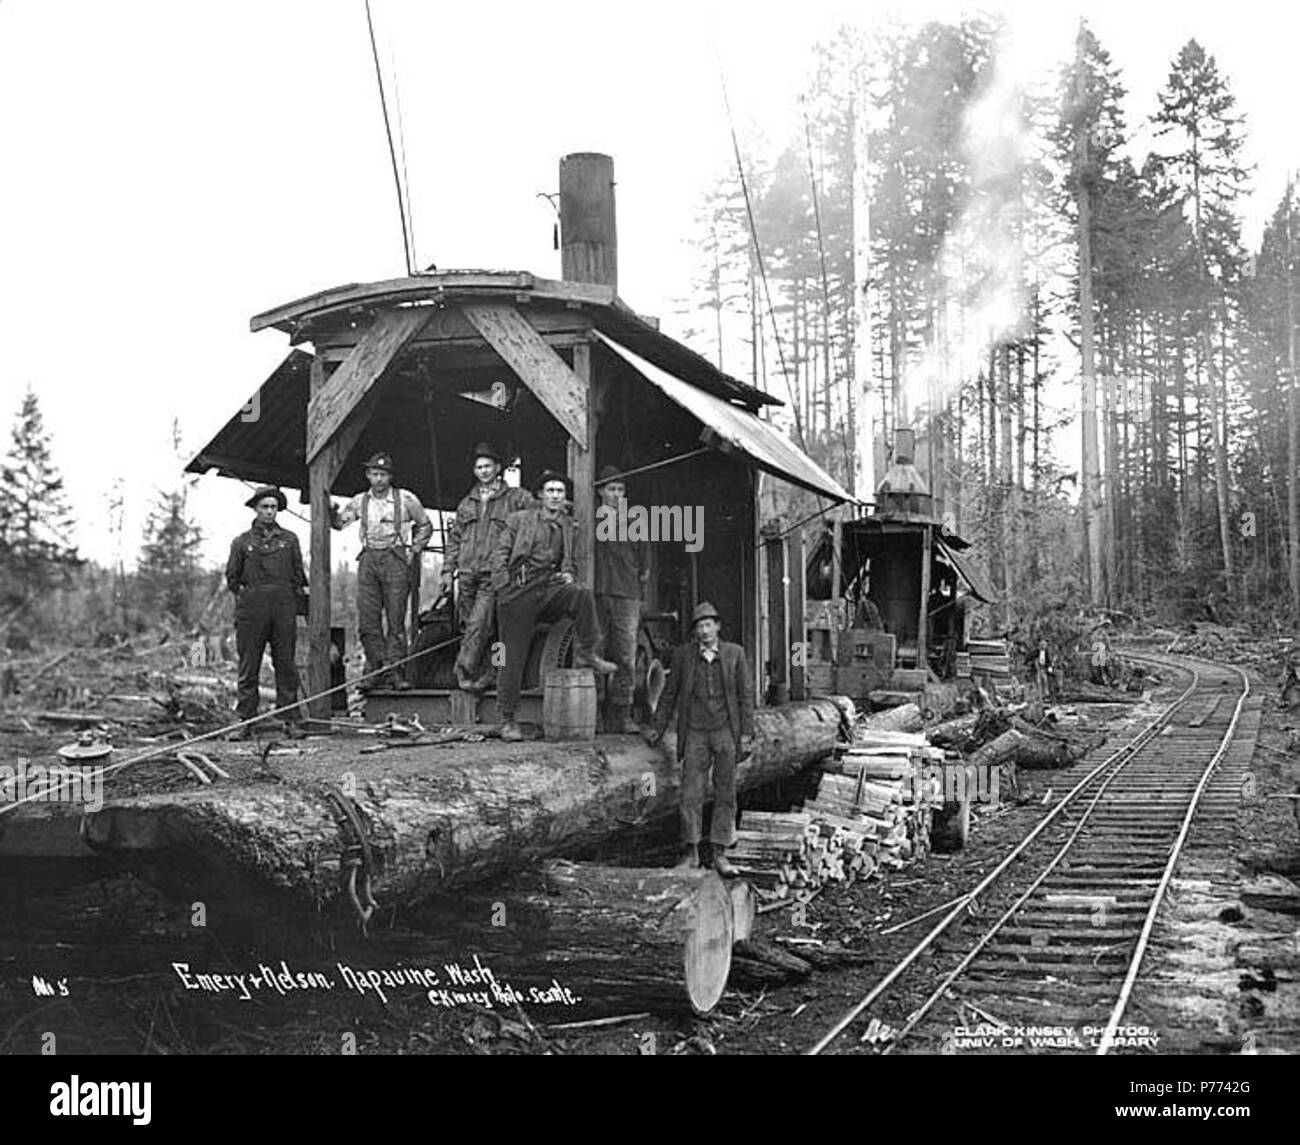 . English: Logging crew and donkey engine beside railroad track, Emery and Nelson, Inc., ca. 1917 . English: Caption on image: Emery & Nelson, Napavine, Wash. C. Kinsey Photo, Seattle. No. 5 PH Coll 516.1136 Emery & Nelson, Inc. was in business from ca. 1909 to ca. 1928, headquartered in Napavine in Lewis County. Napavine is seven miles southeast of Chehalis on the Newaukum River in west central Lewis County. It is on John Urquhart's Donation Land Claim. On December 17,1863, it was named by James Urquhart, using the Indian name which means small prairie. In 1873, Northern Pacific Railway offic Stock Photo